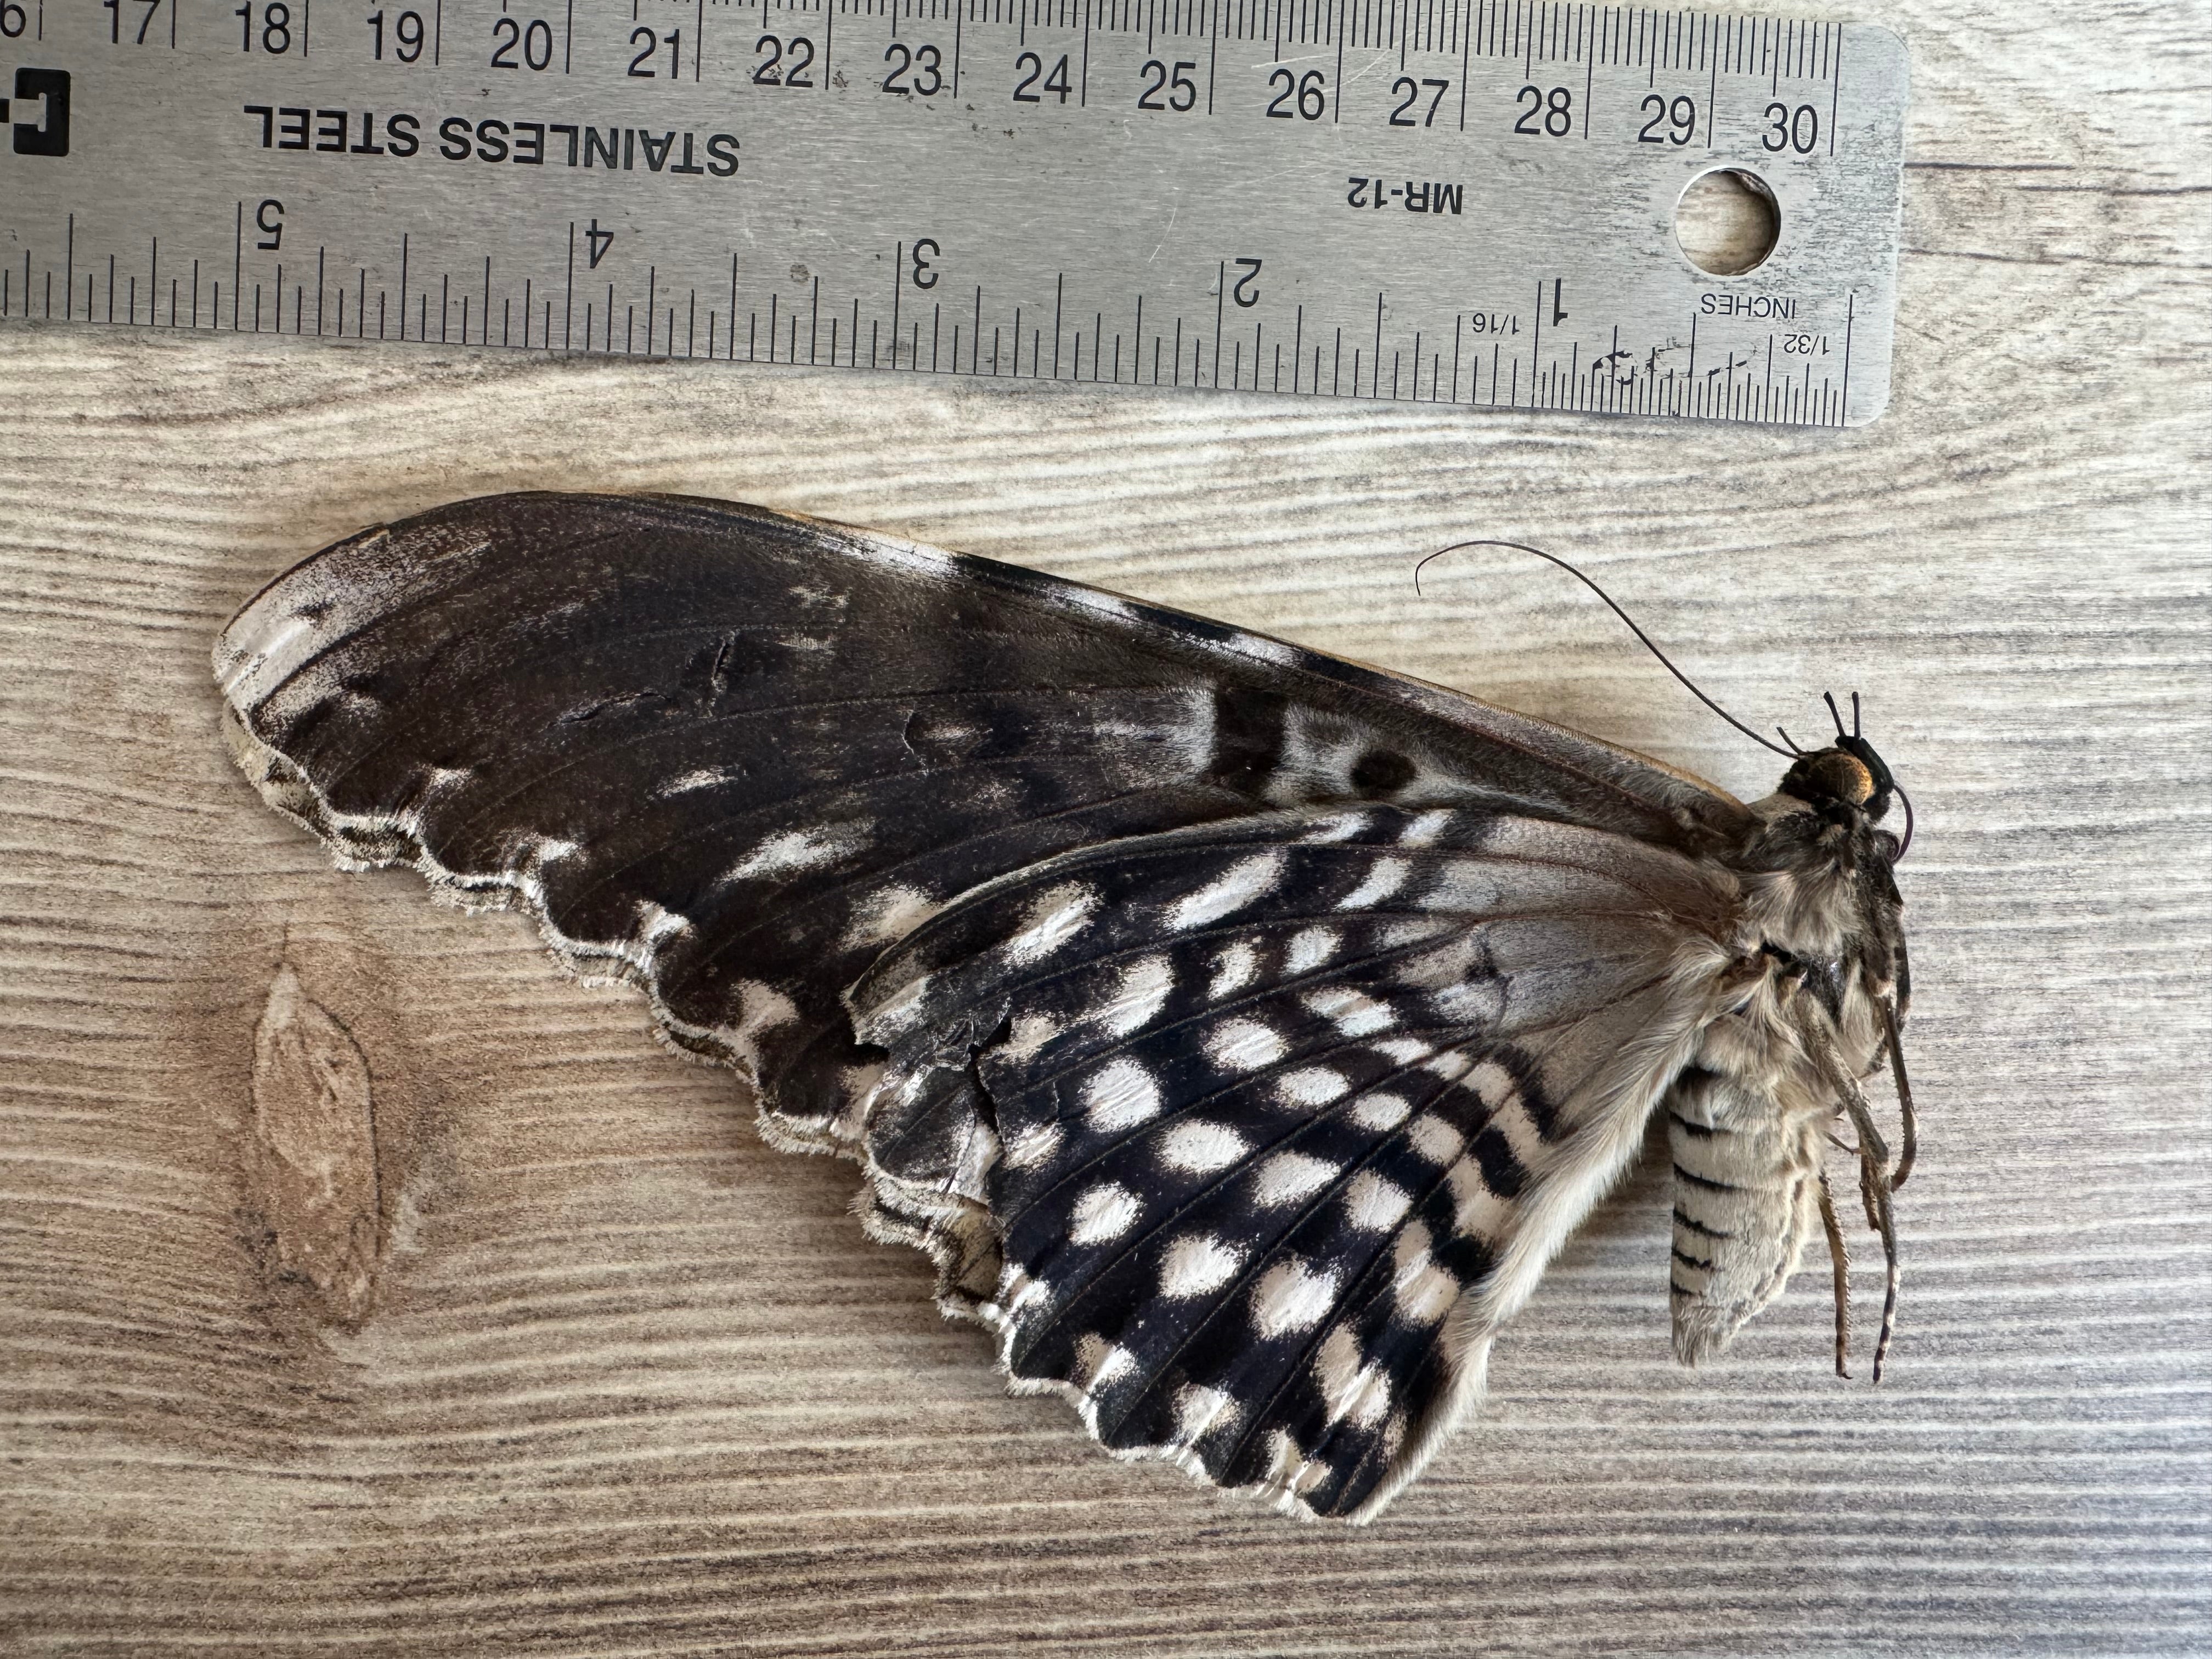 HUGE Thysania agrippina Moth Unspread Damaged